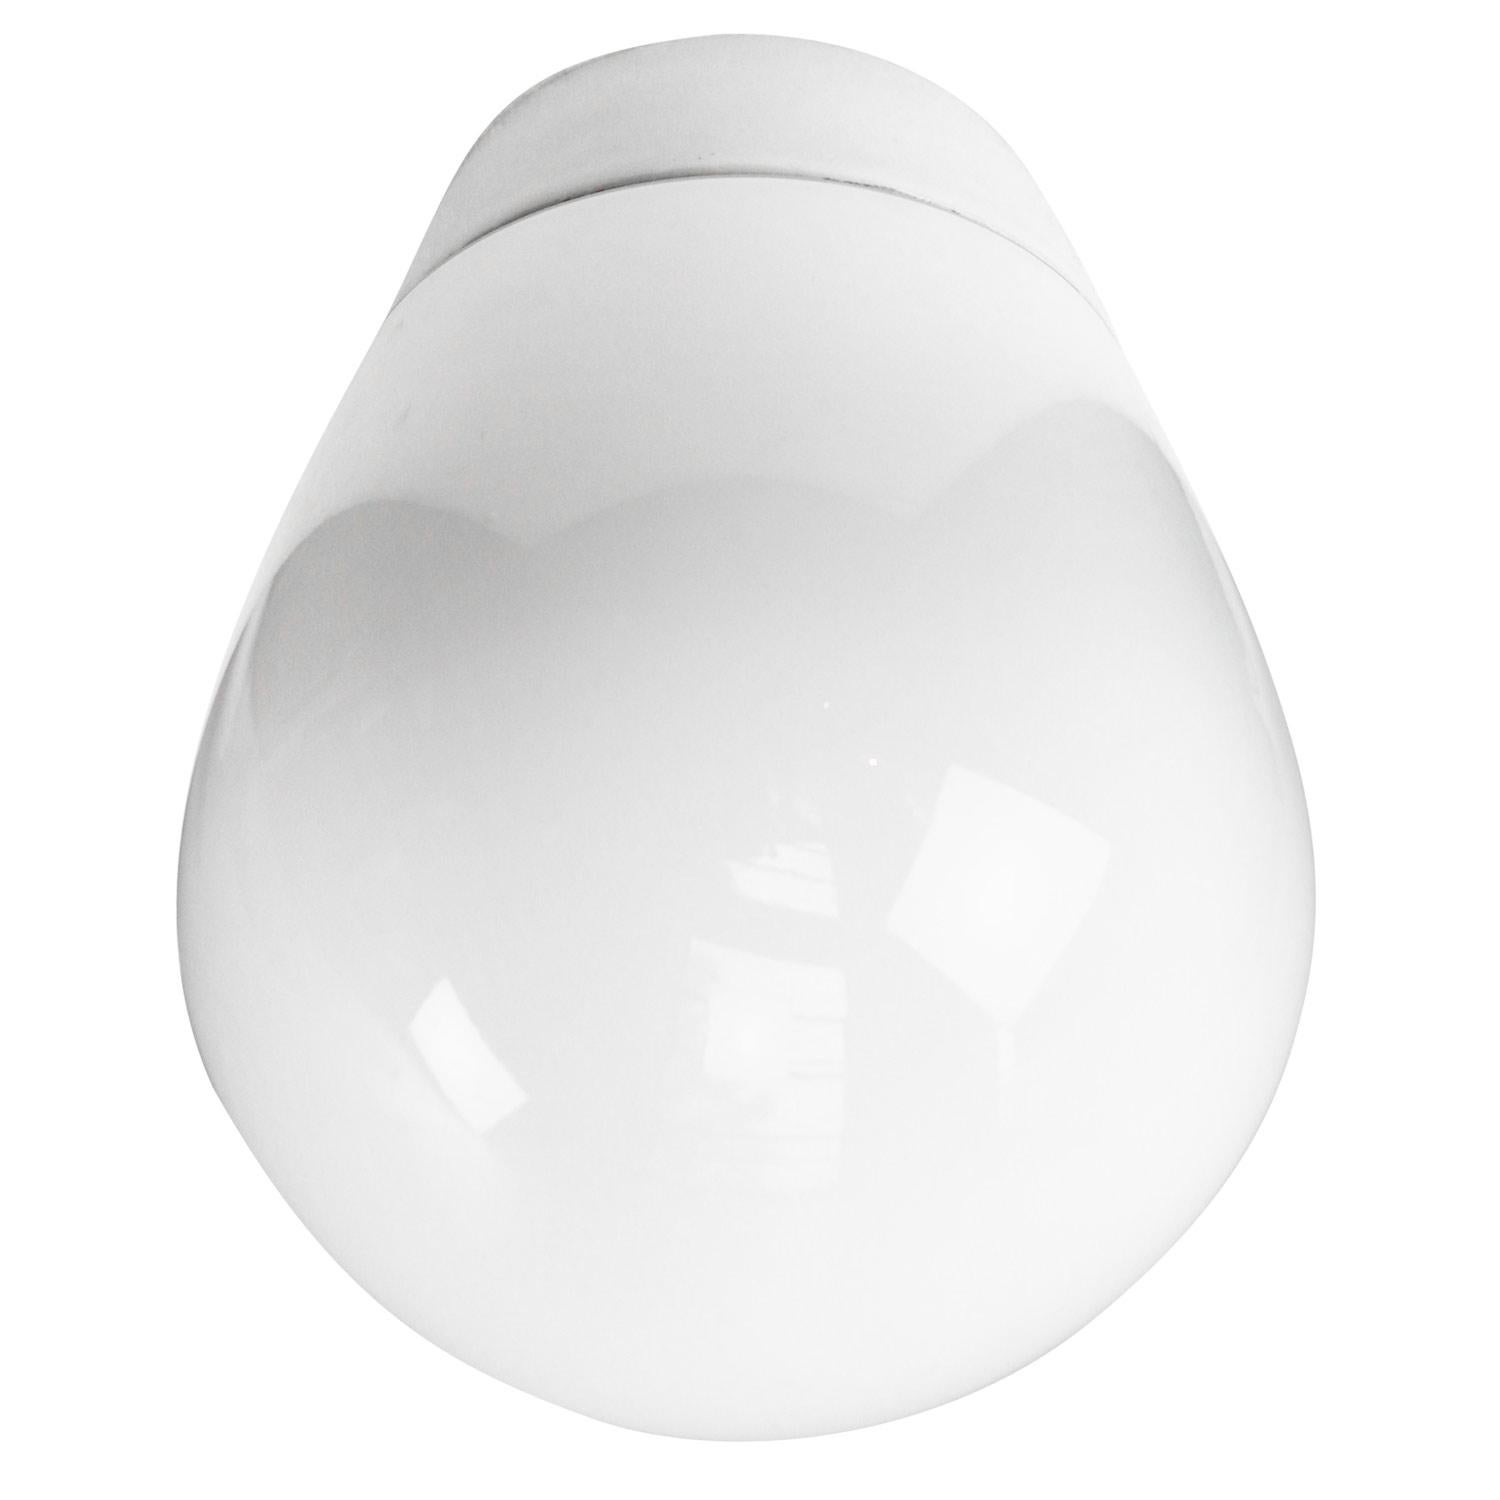 Porcelain wall lamp / scone by Lindner no. 6001
Designed by Wilhelm Wagenfeld
White porcelain, white opaline glass.

2 conductors, no ground.
Measures: Diameter foot 85 mm
Suitable for 110 volt USA
New wiring is UL listed (110 volt) or CE